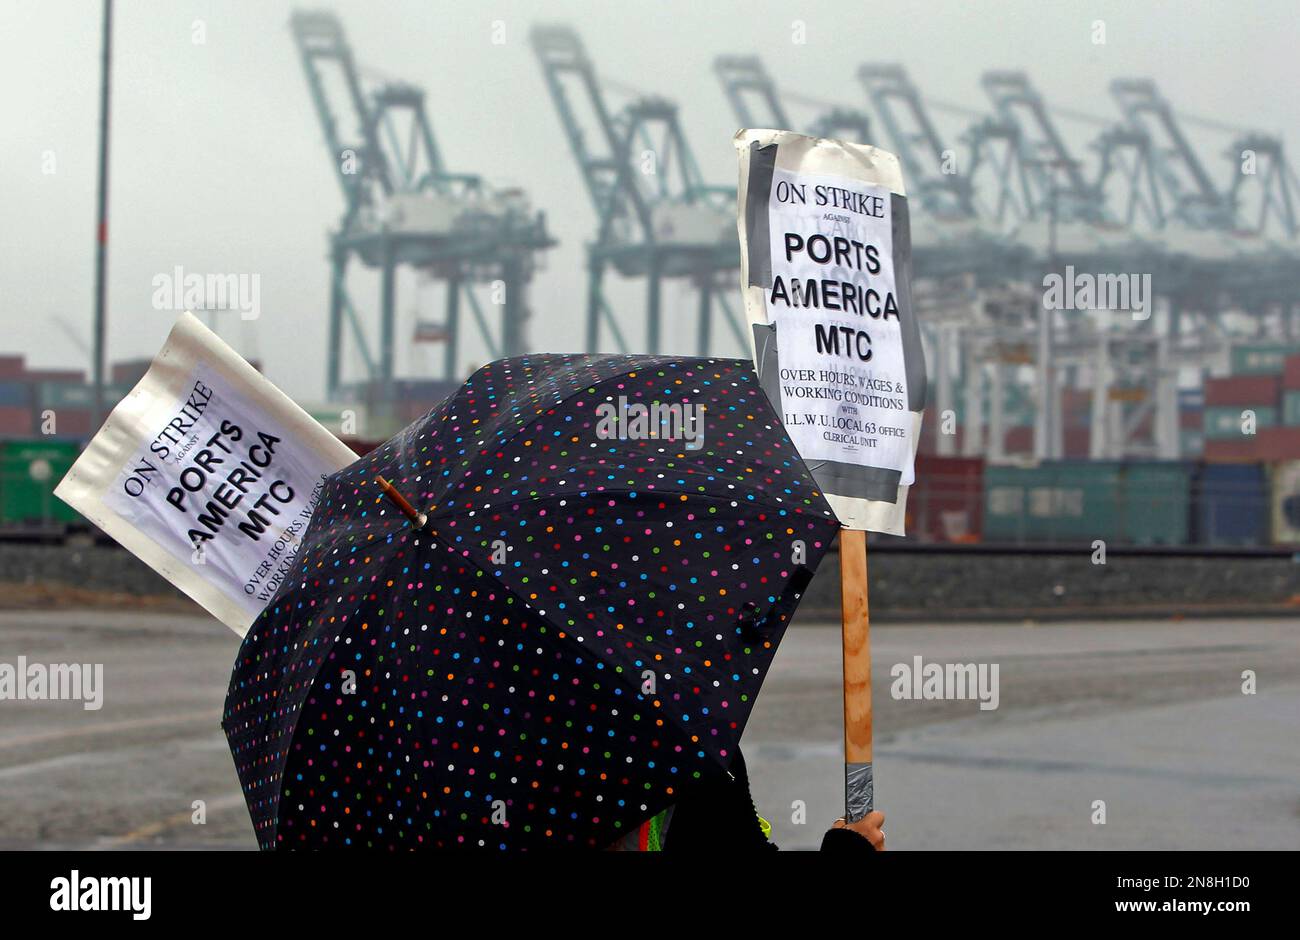 A clerical worker pickets in the rain at the Maersk cargo terminal, where container-handling cranes are in the up and idle position, background, at the Port of Los Angeles Thursday, Nov. 29, 2012. Cargo ships were stacking up at the ports of Los Angeles and Long Beach as a strike by about about 70 clerical workers shut down most of the terminals that together are the nation's busiest port complex. Dockworkers were refusing to cross the picket lines even though an arbitrator ruled the walkout invalid on Tuesday. By Thursday morning, at least 18 ships docked and inside the adjacent harbors were  Stock Photo